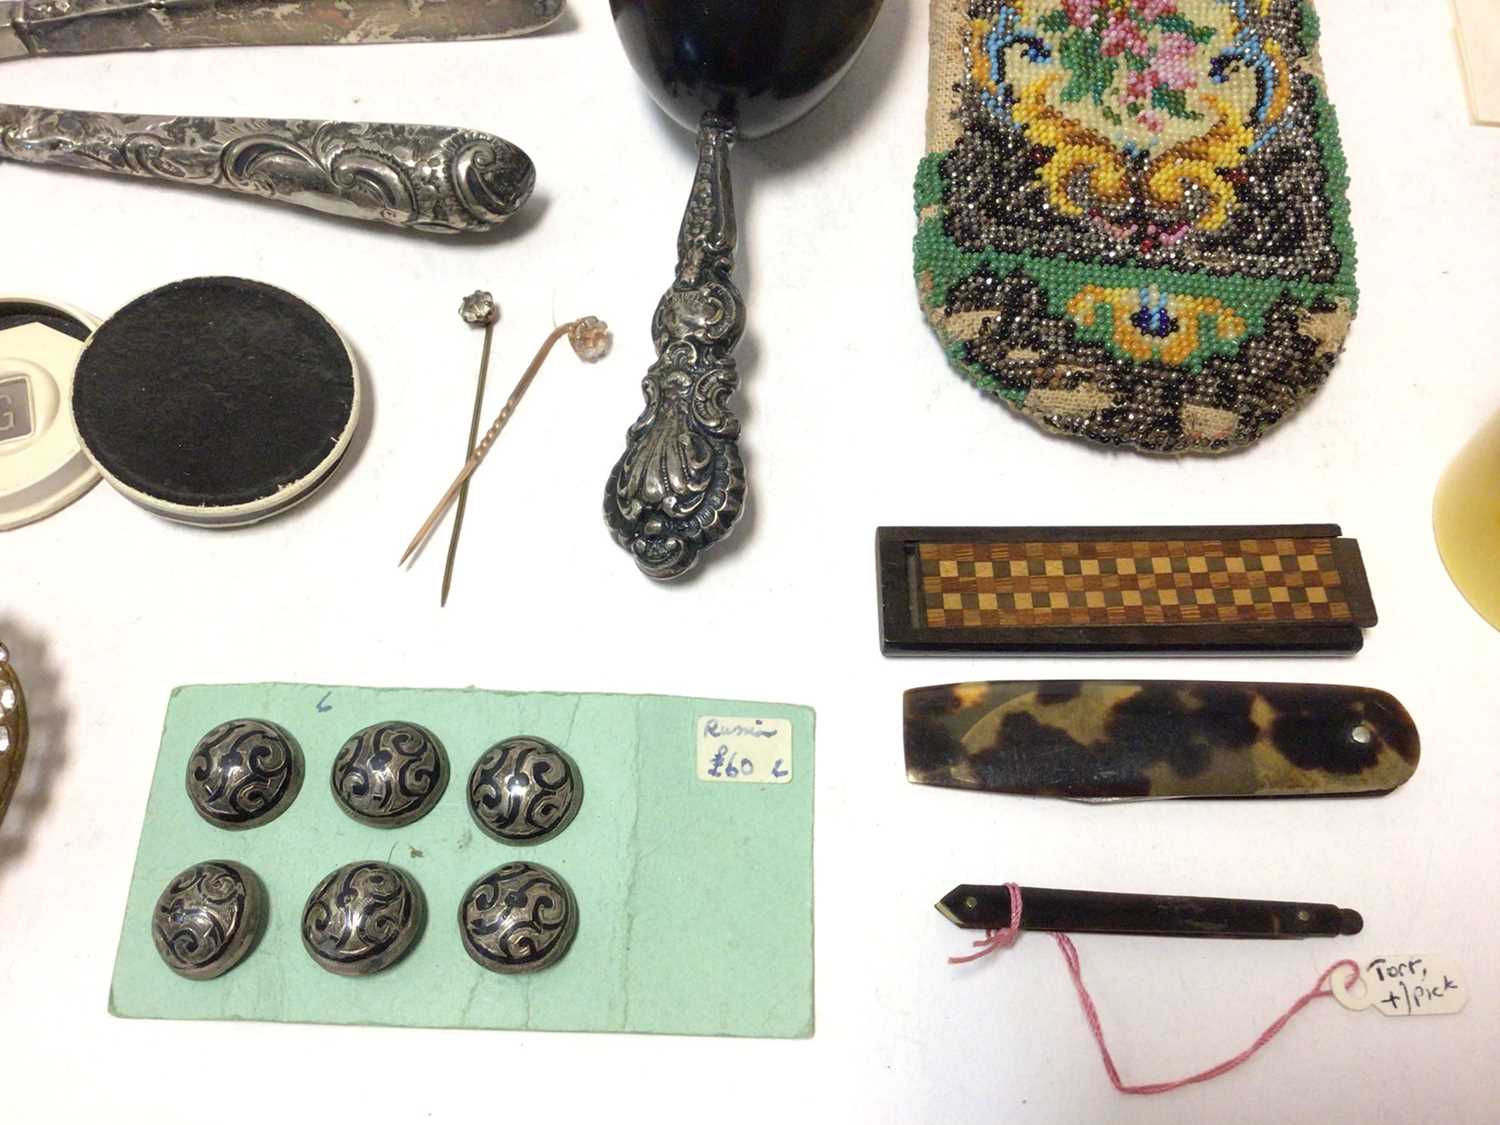 19th century paste buckles, silhouettes, book slide and sundries - Image 3 of 8